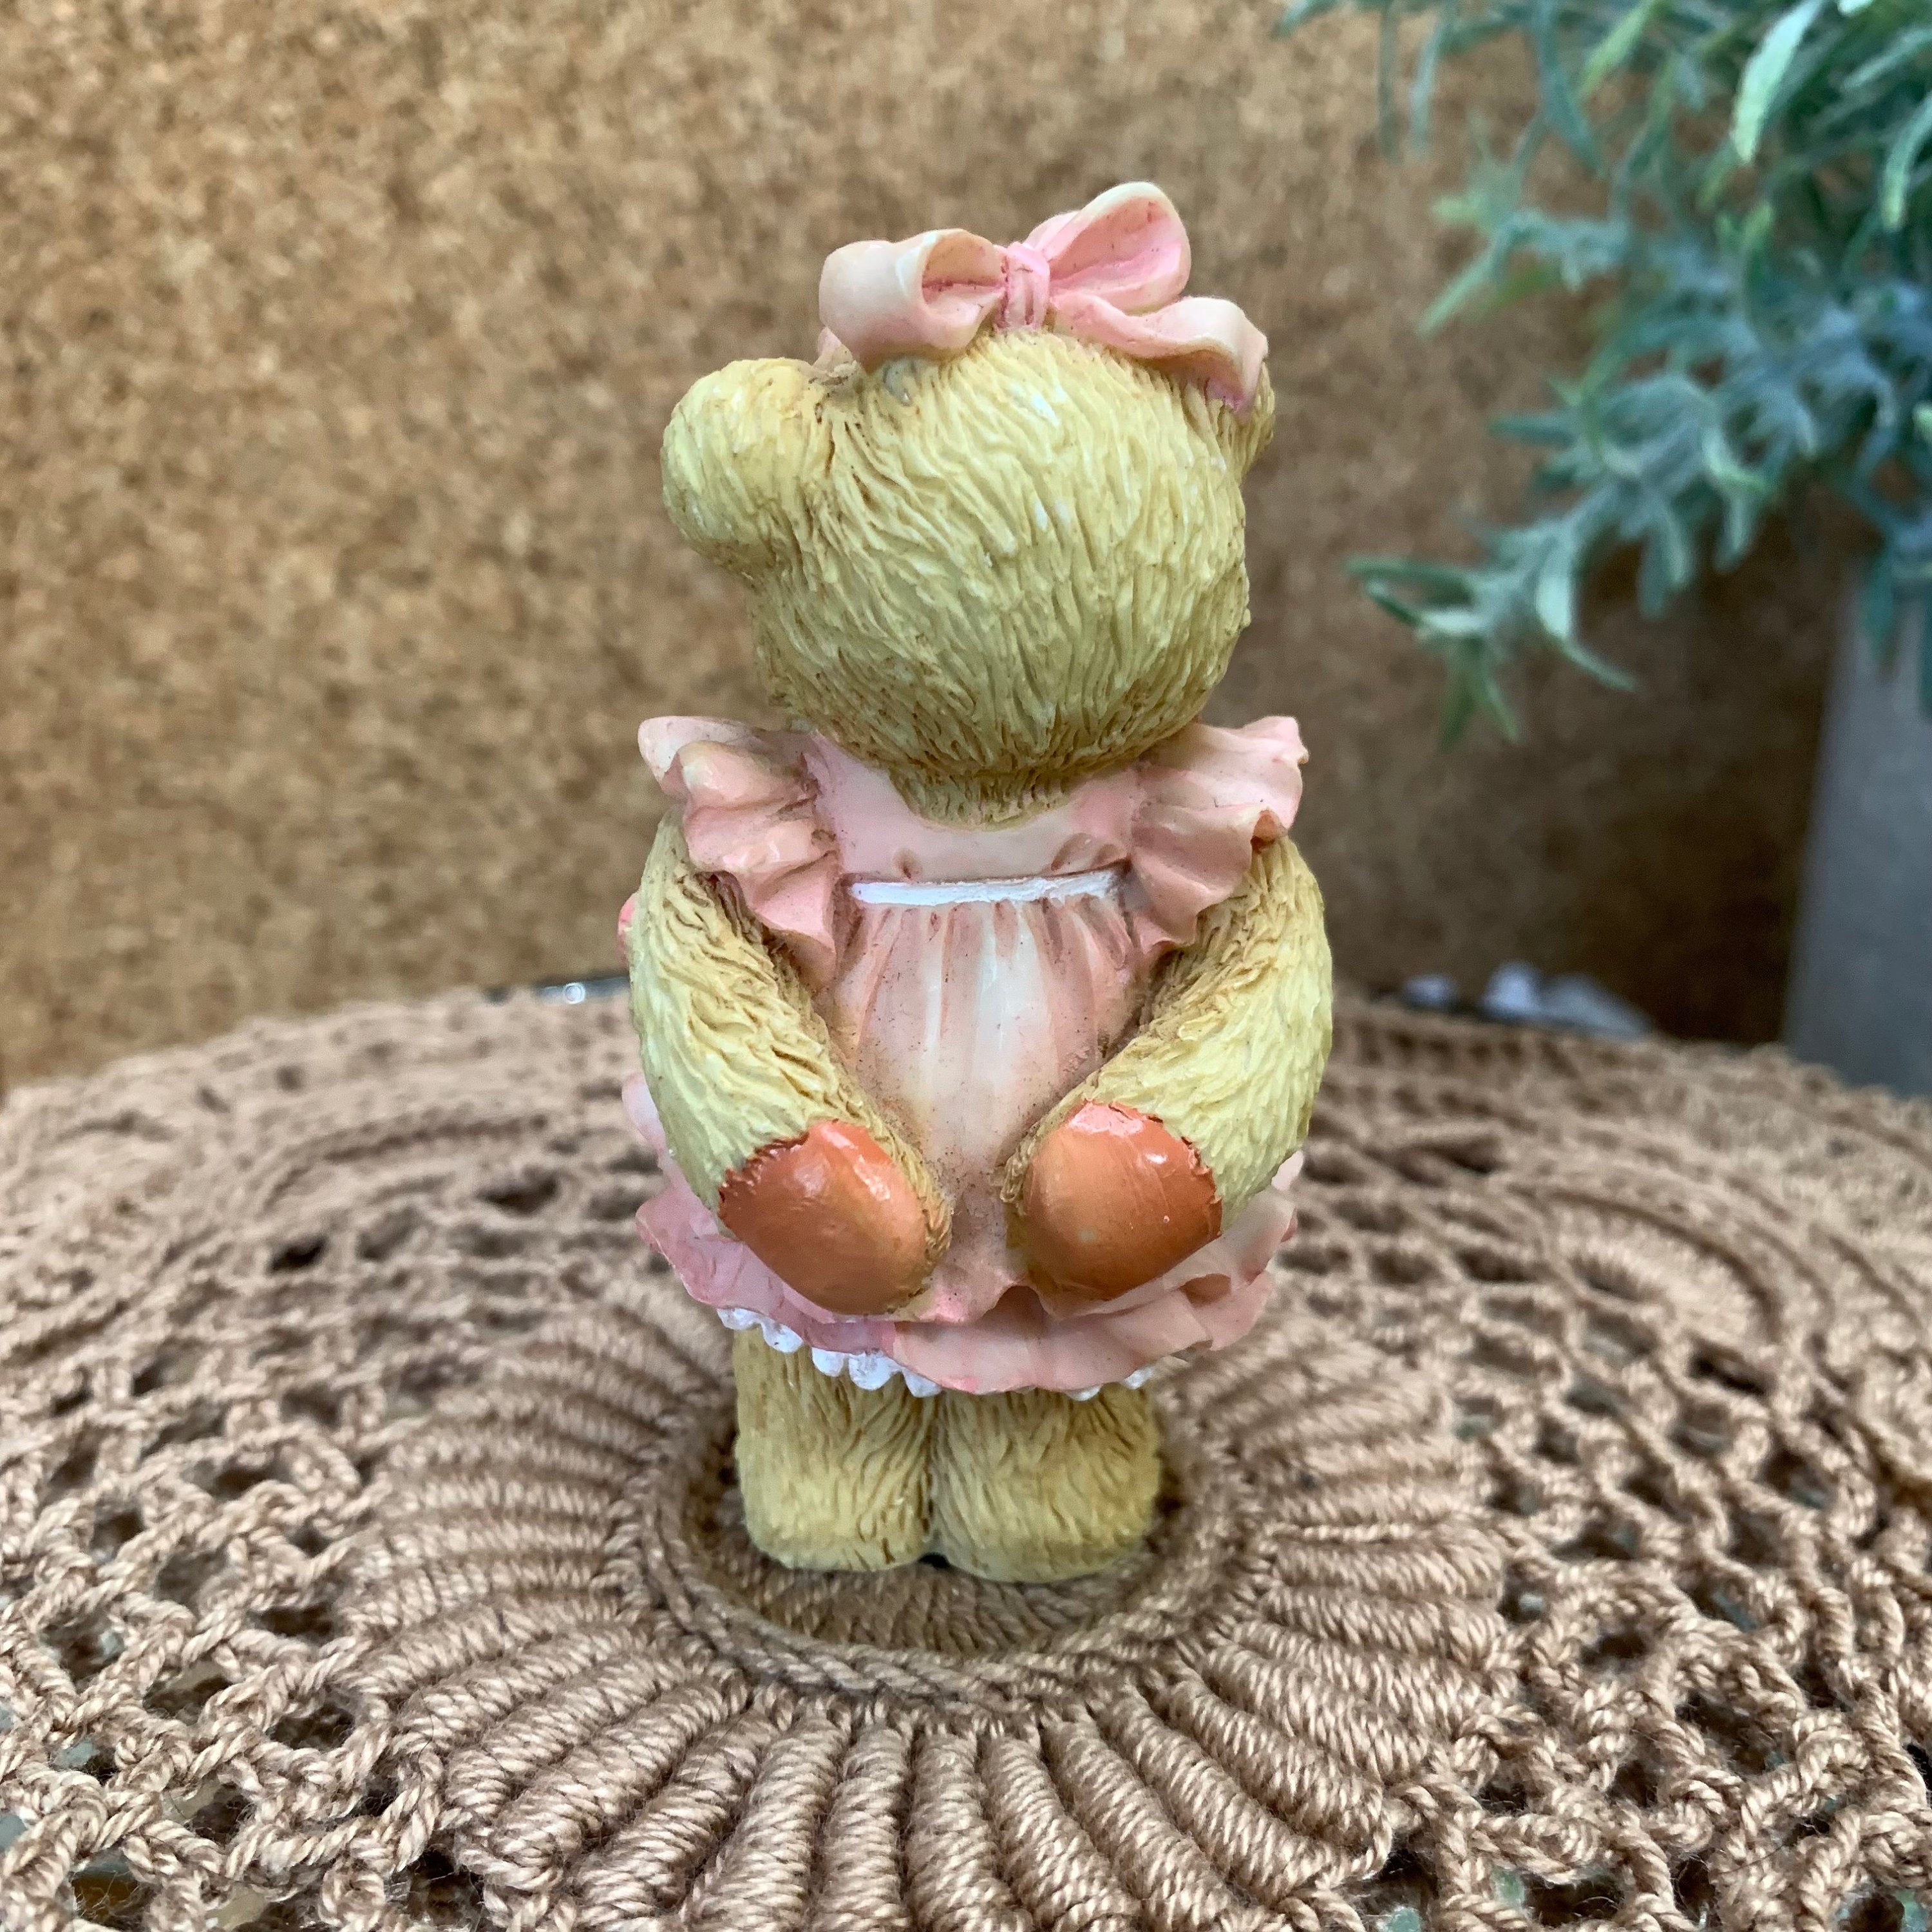 Vintage Collectible Teddy Bear by Priscilla Hillman “Child Of Love”